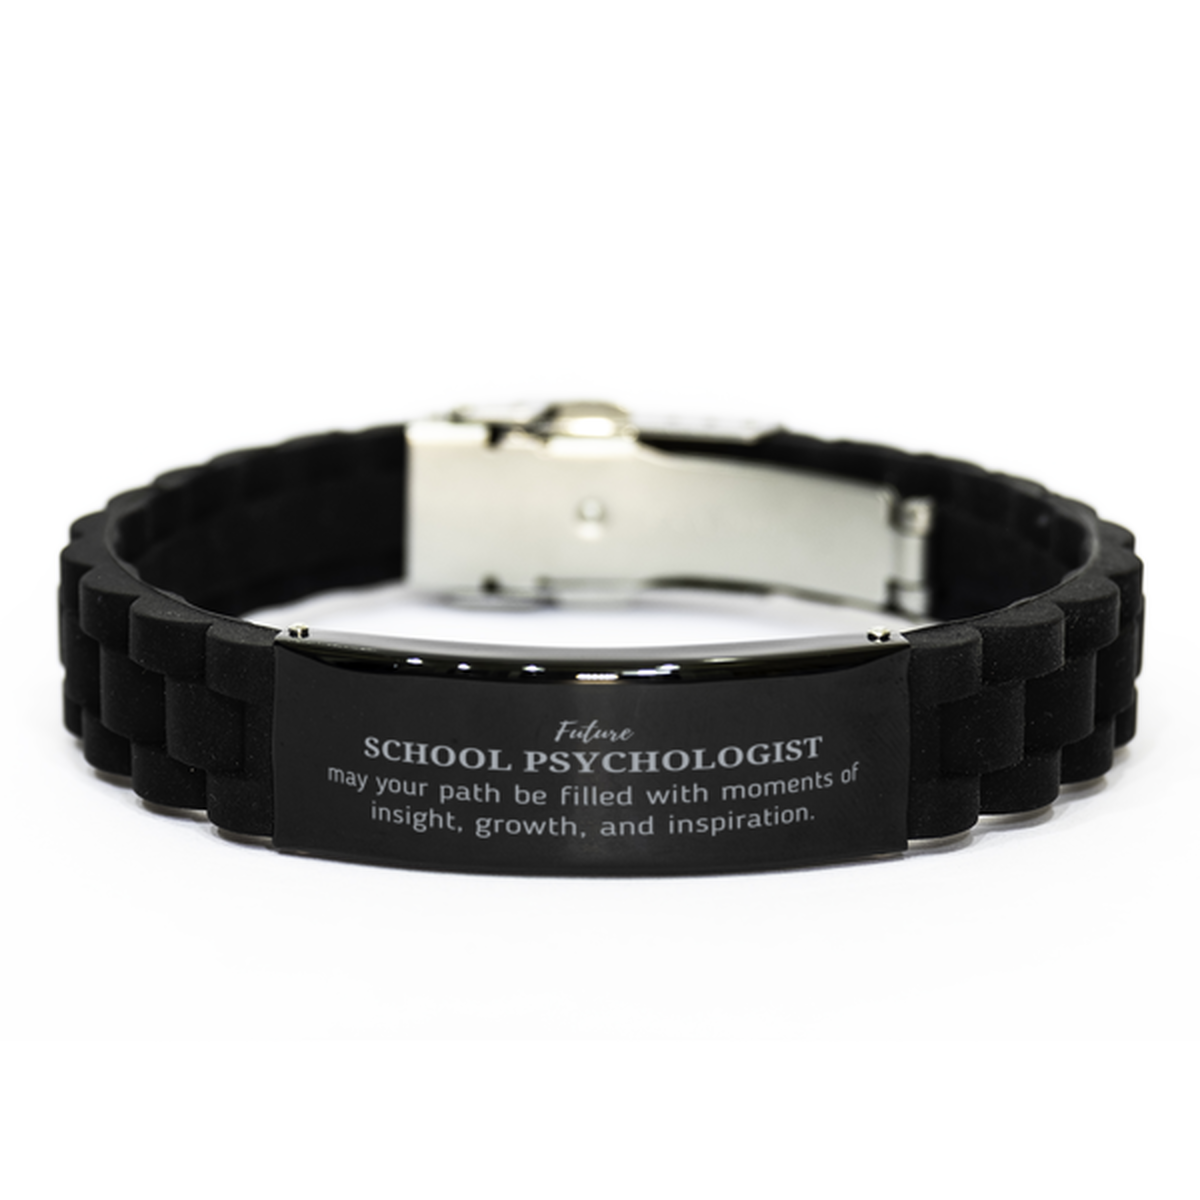 Future School Psychologist Gifts, May your path be filled with moments of insight, Graduation Gifts for New School Psychologist, Christmas Unique Black Glidelock Clasp Bracelet For Men, Women, Friends